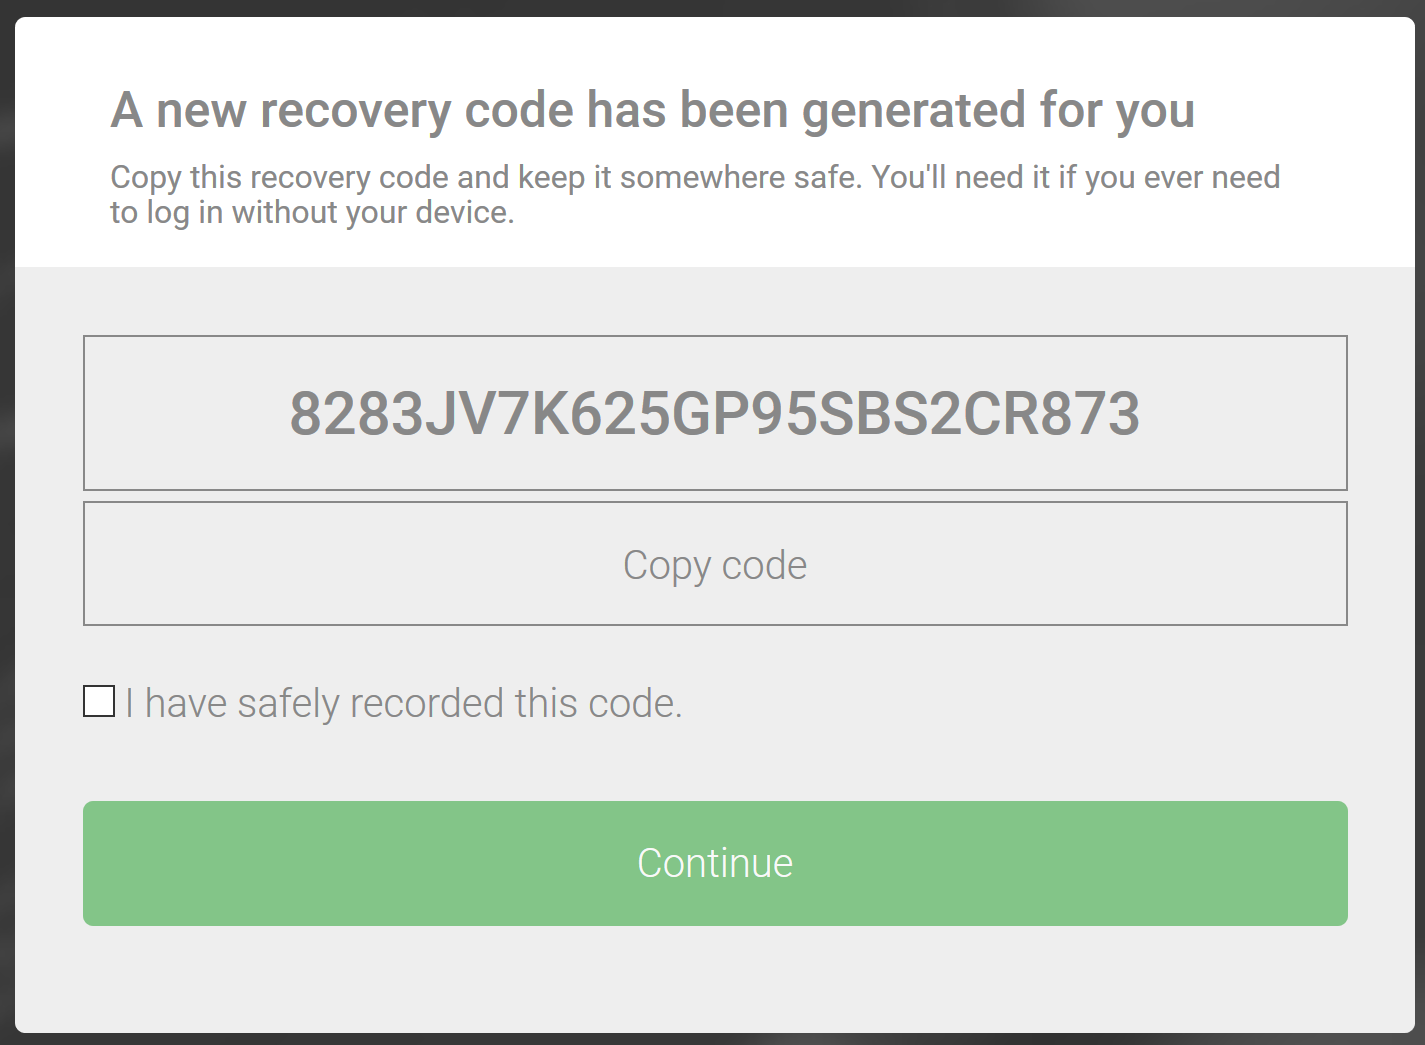 Recovery code correct